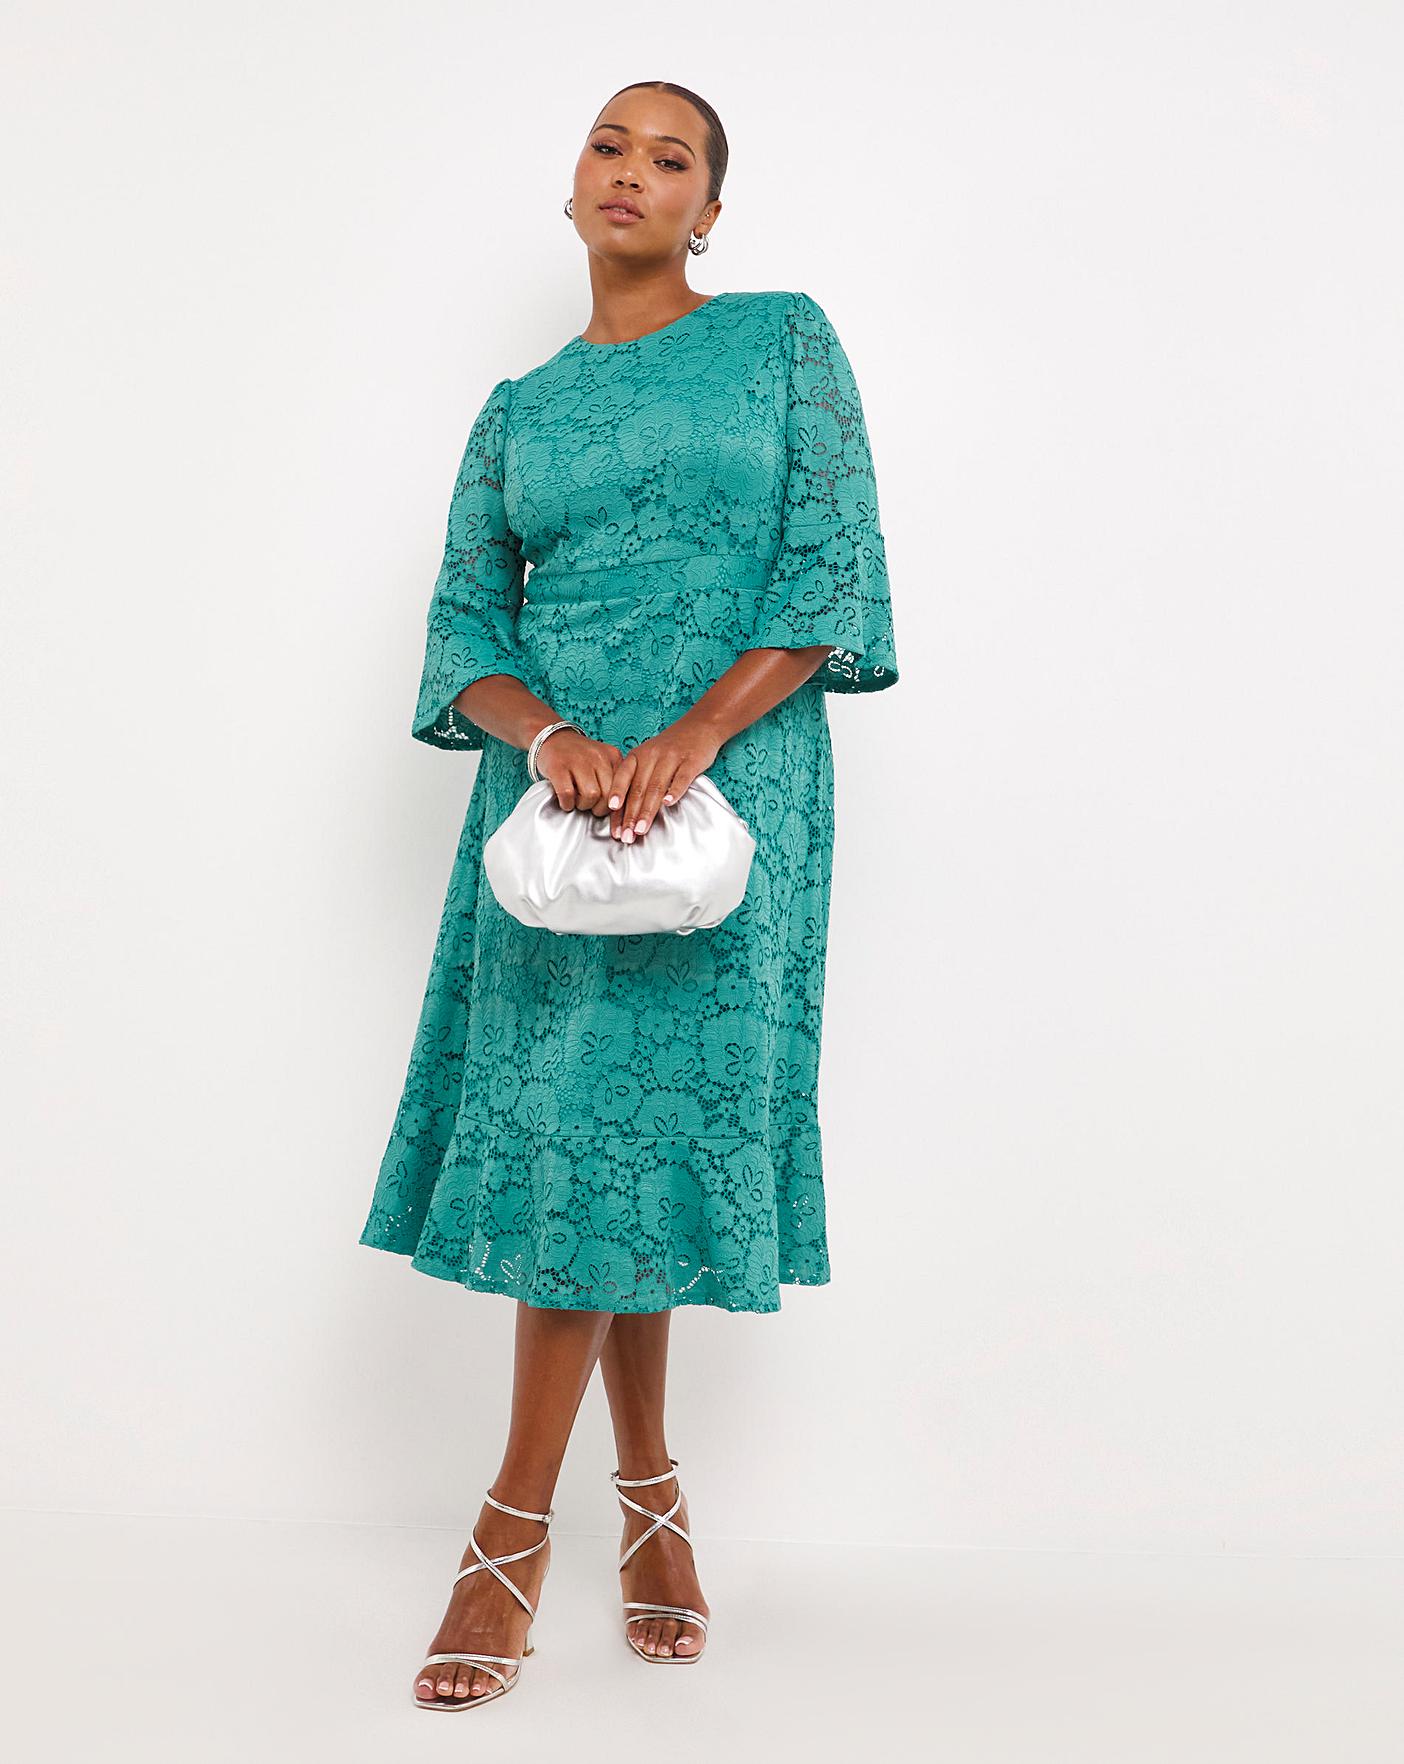 Joanna Hope Green Stretch Lace Dress | Simply Be